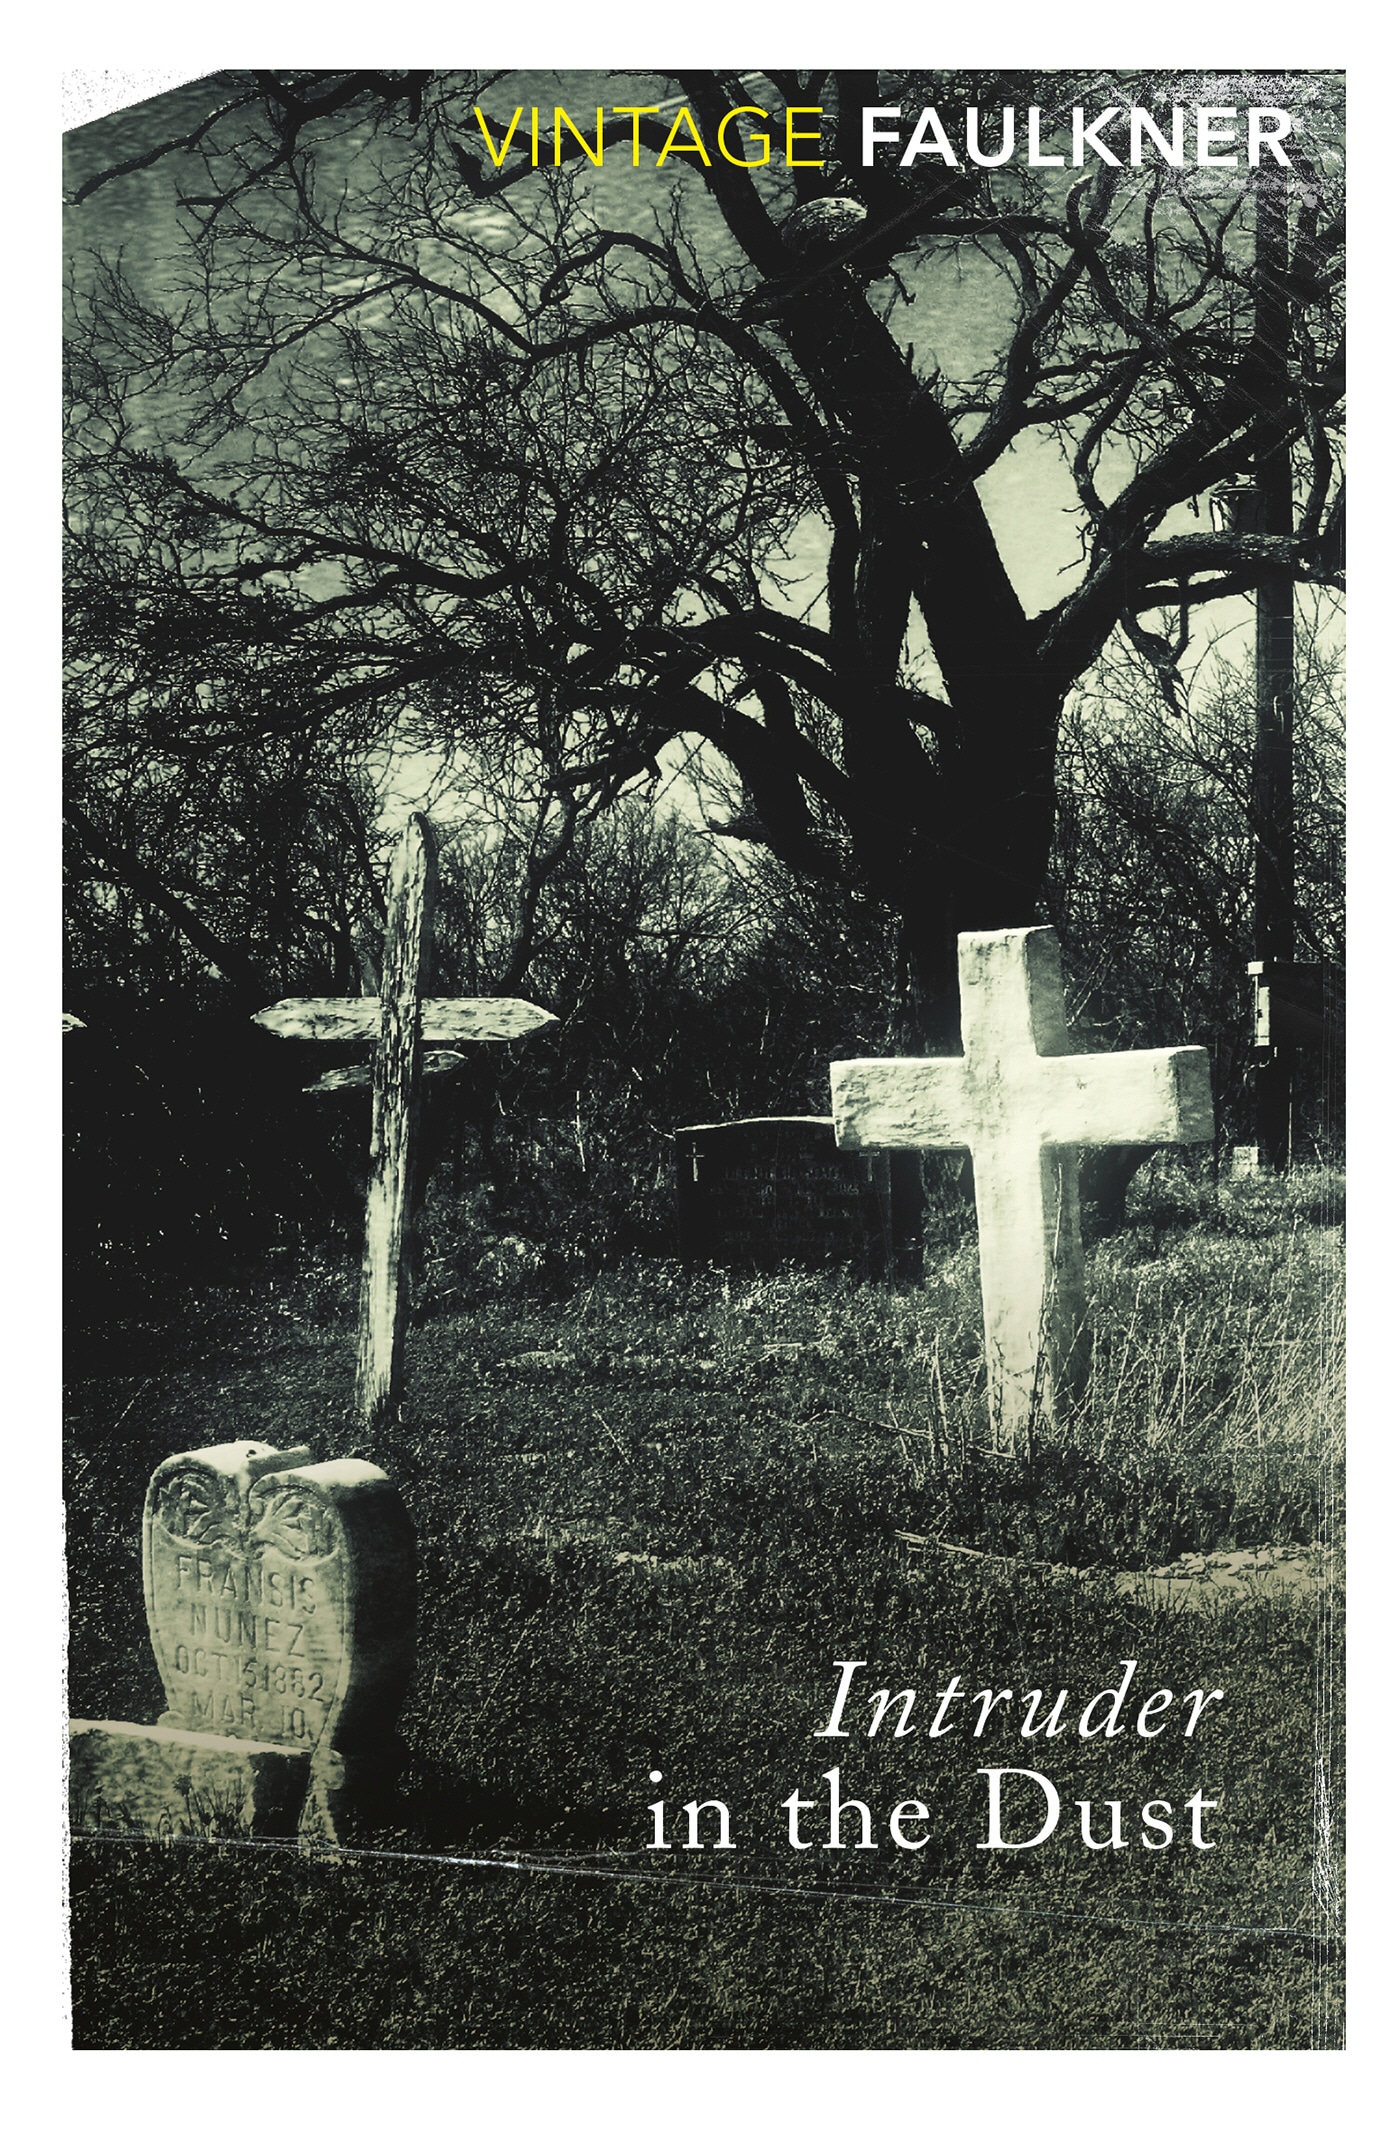 Book “Intruder in the Dust” by William Faulkner — August 8, 1996